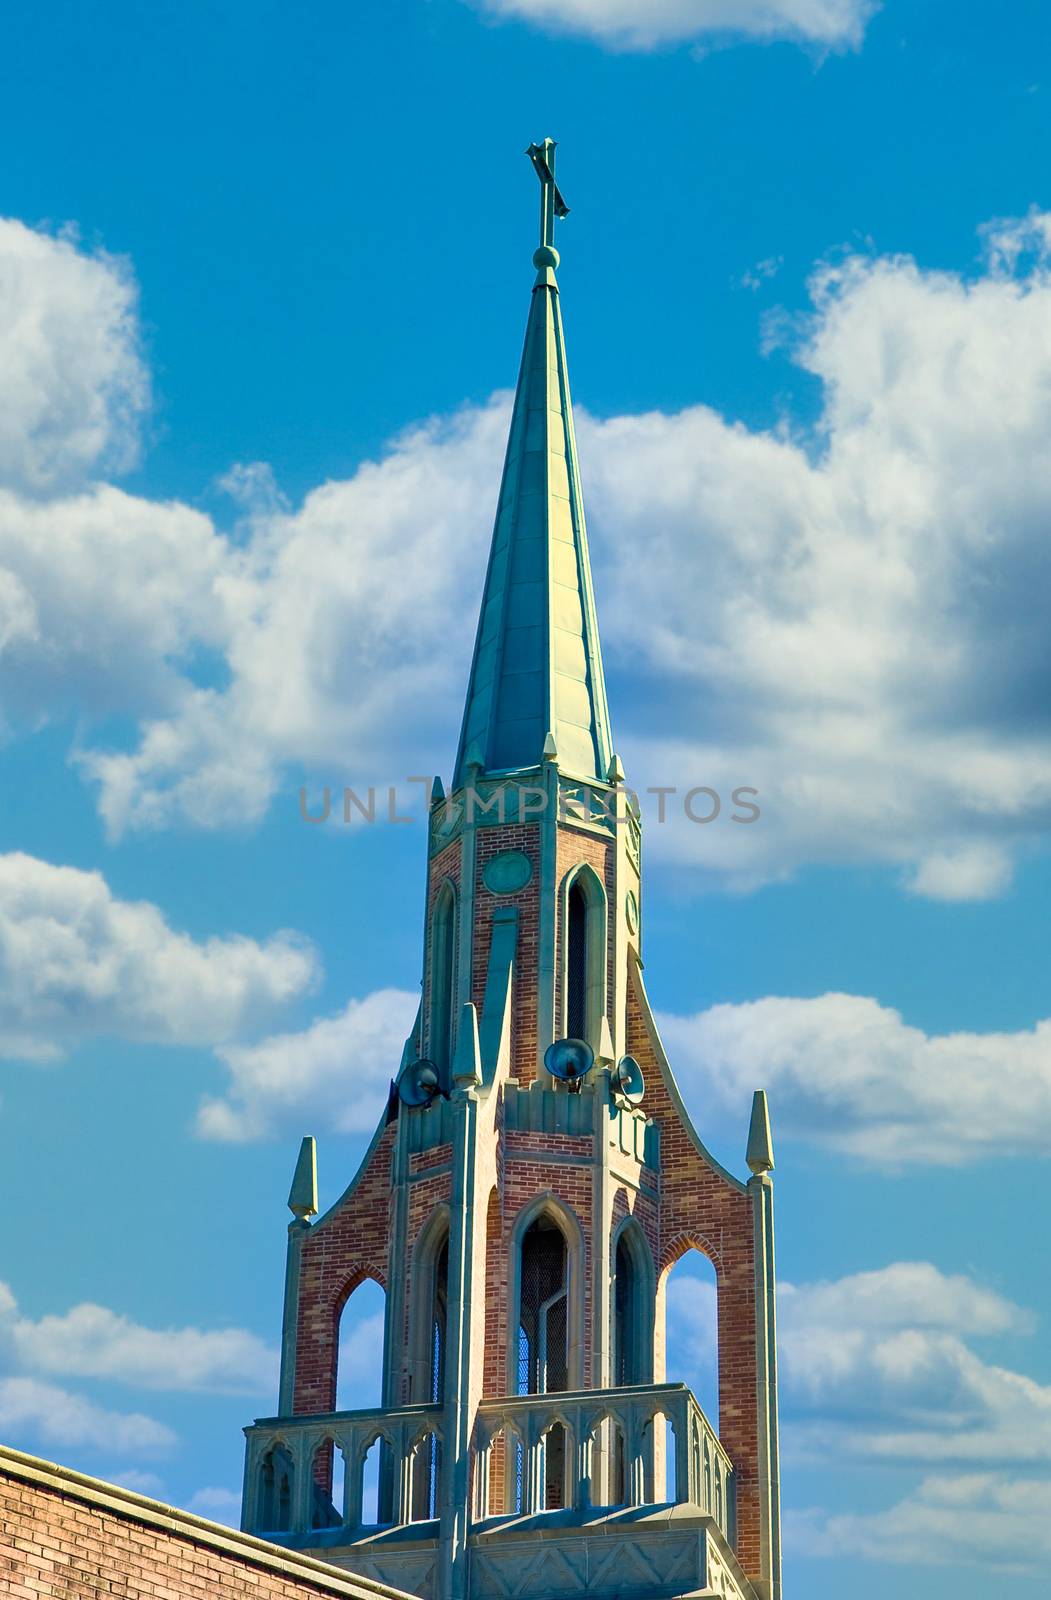 Church Steeple and Ornate Bell Tower by dbvirago